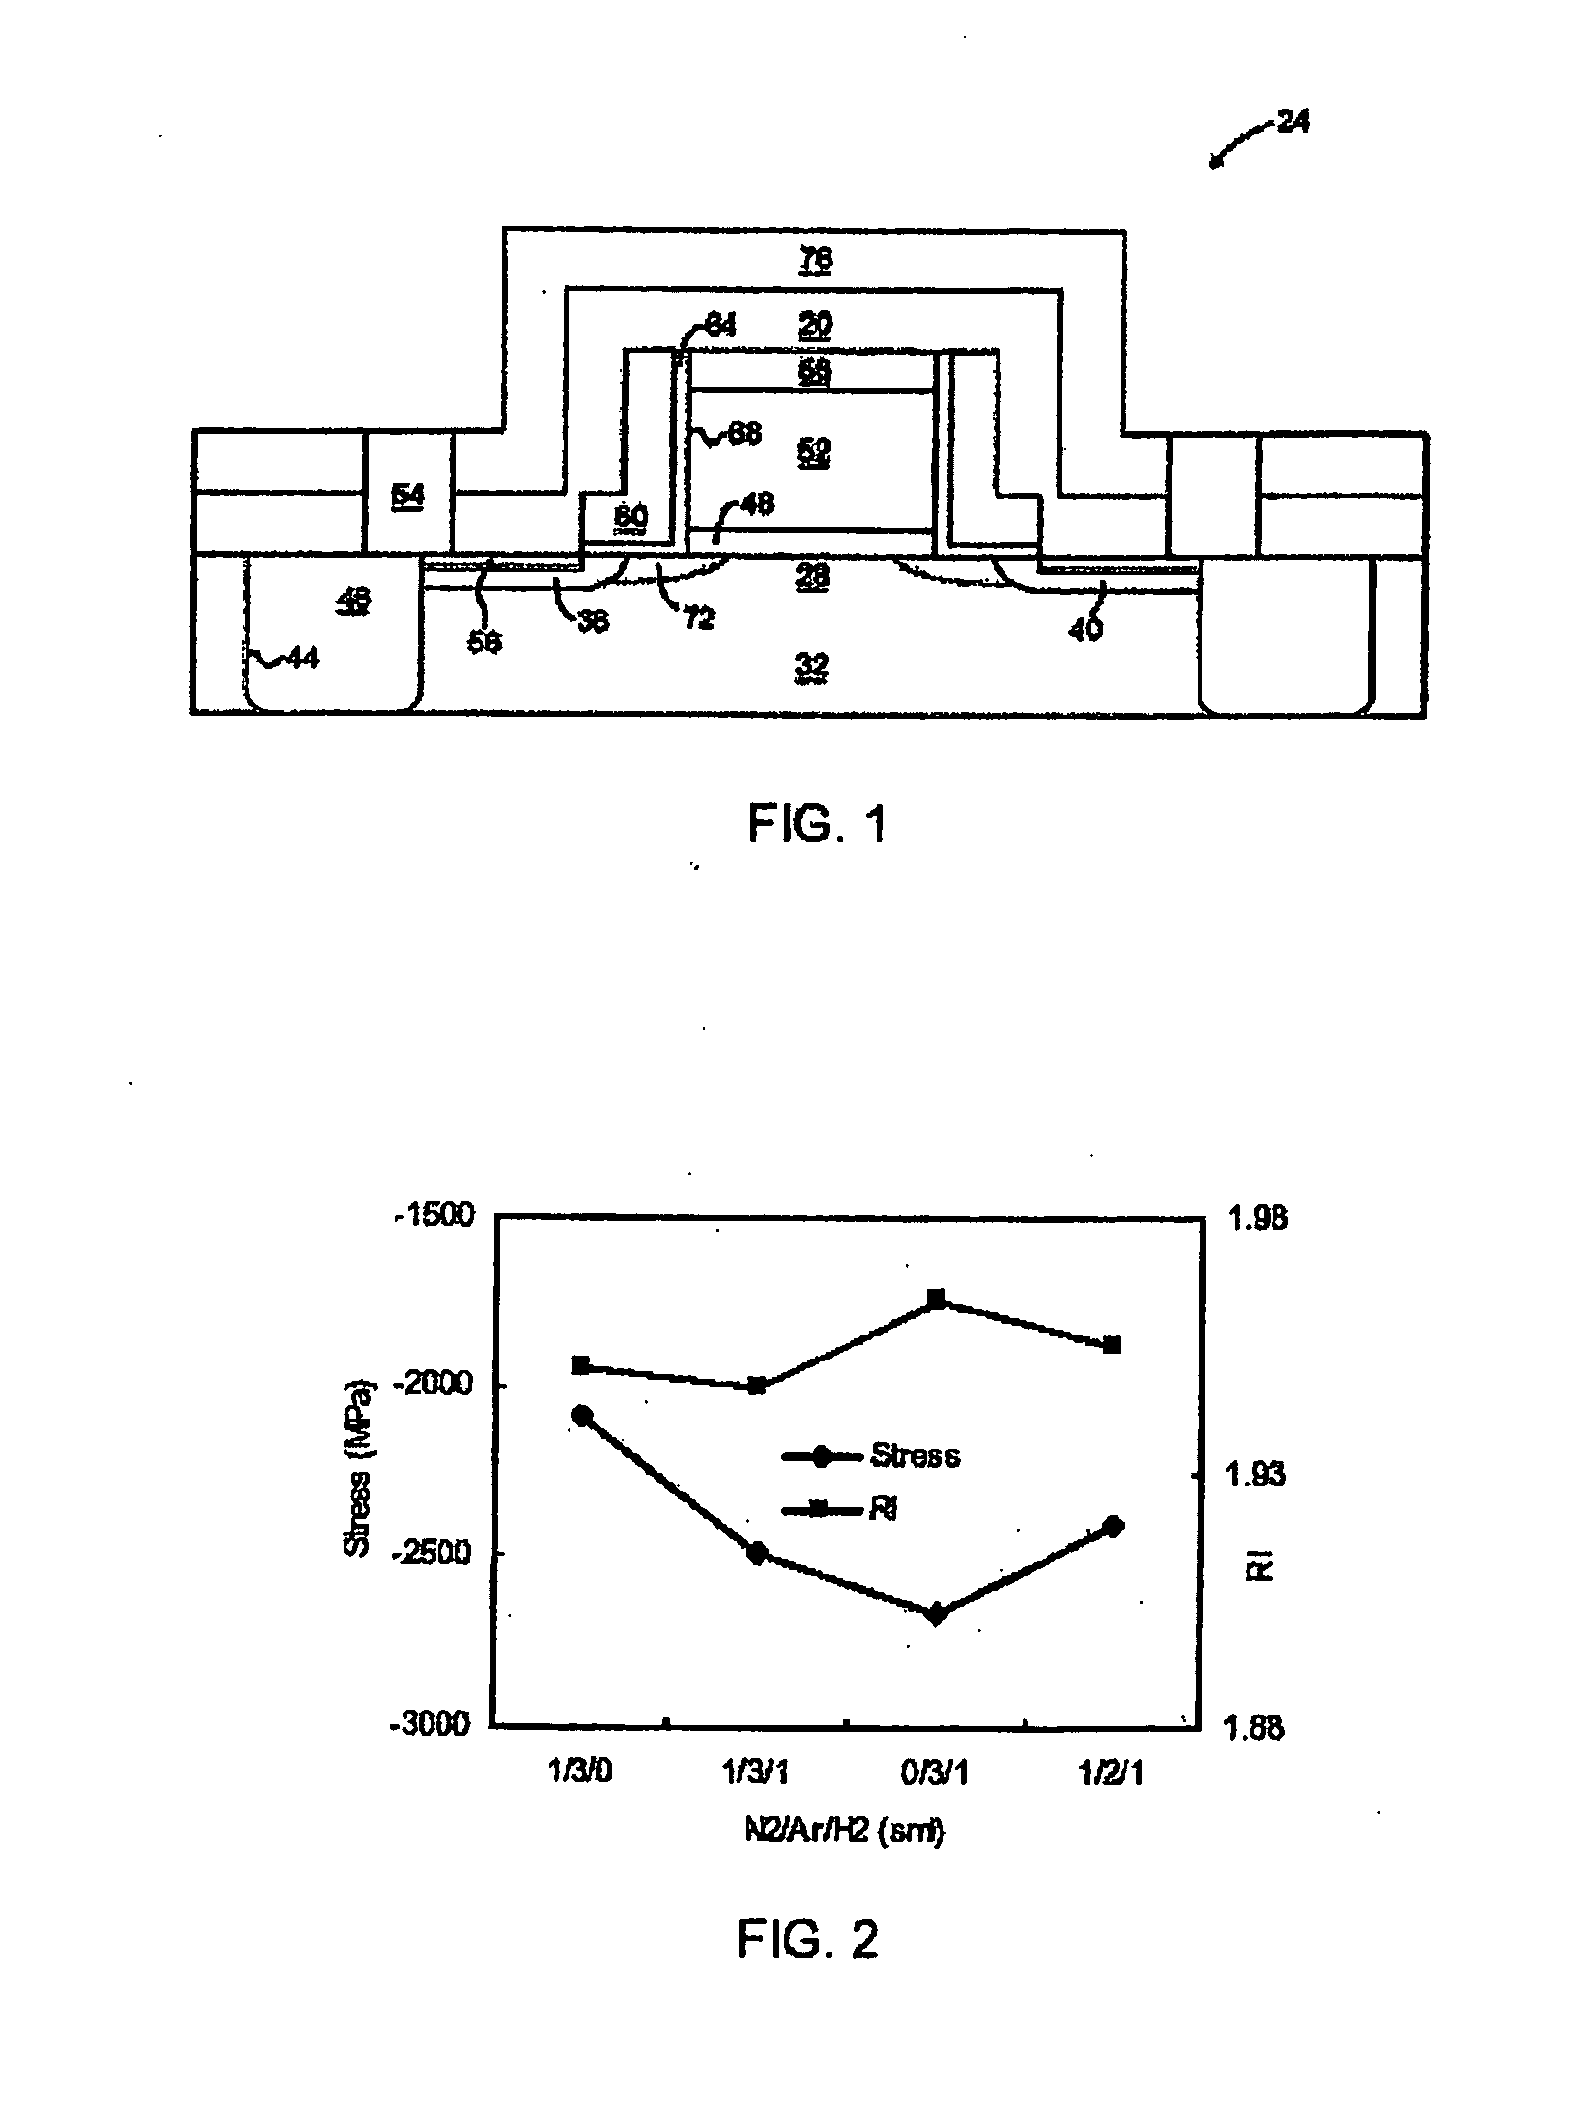 Integration process for fabricating stressed transistor structure